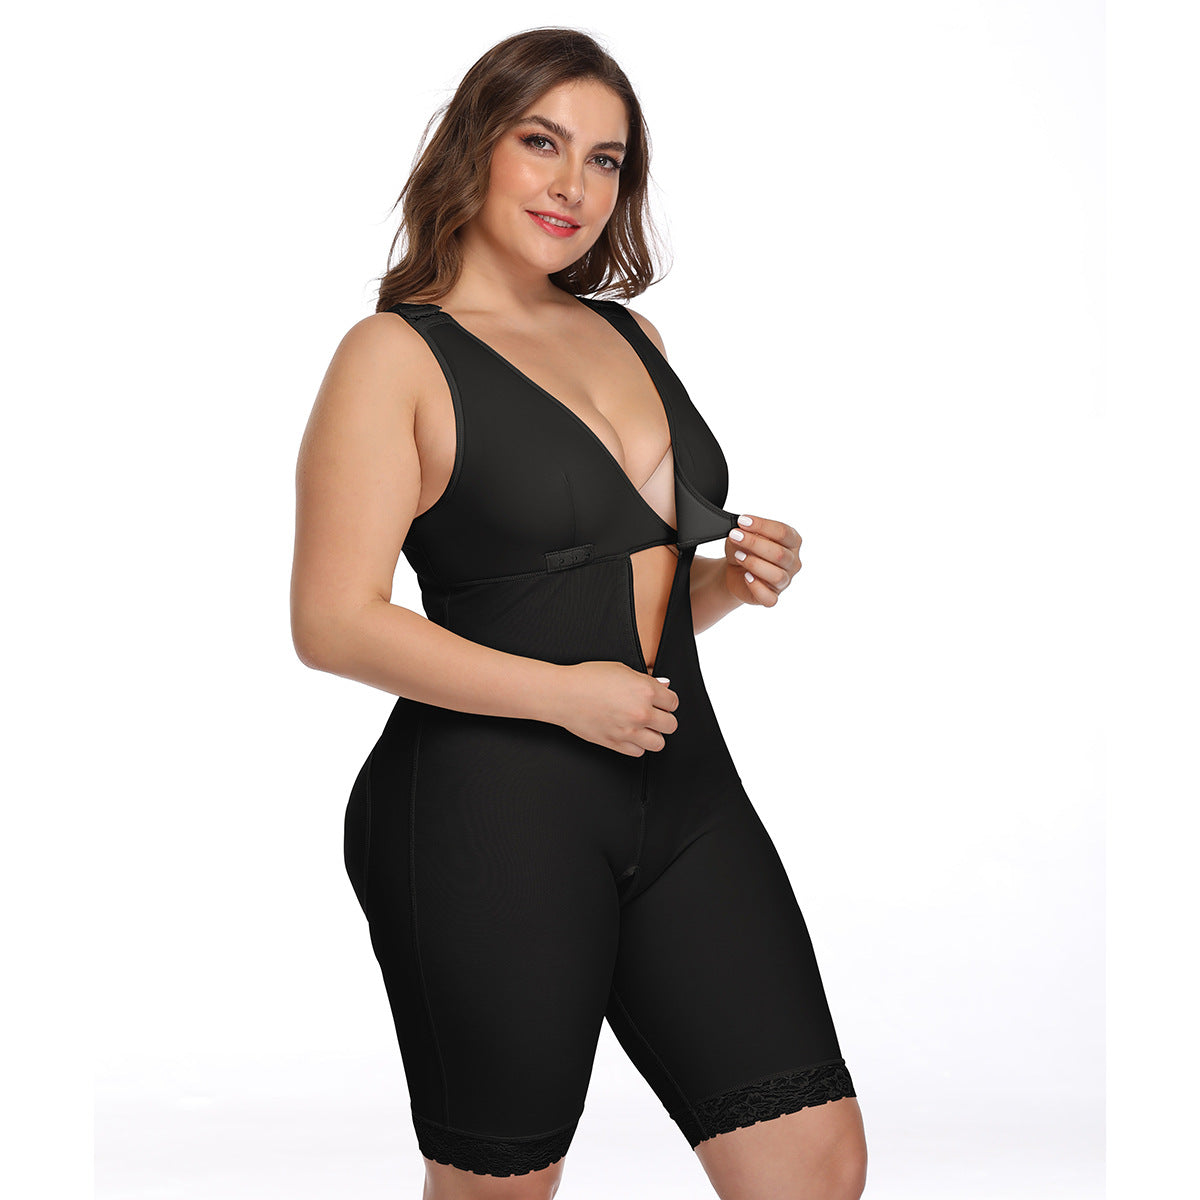 One-piece waist and butt tight shapewear